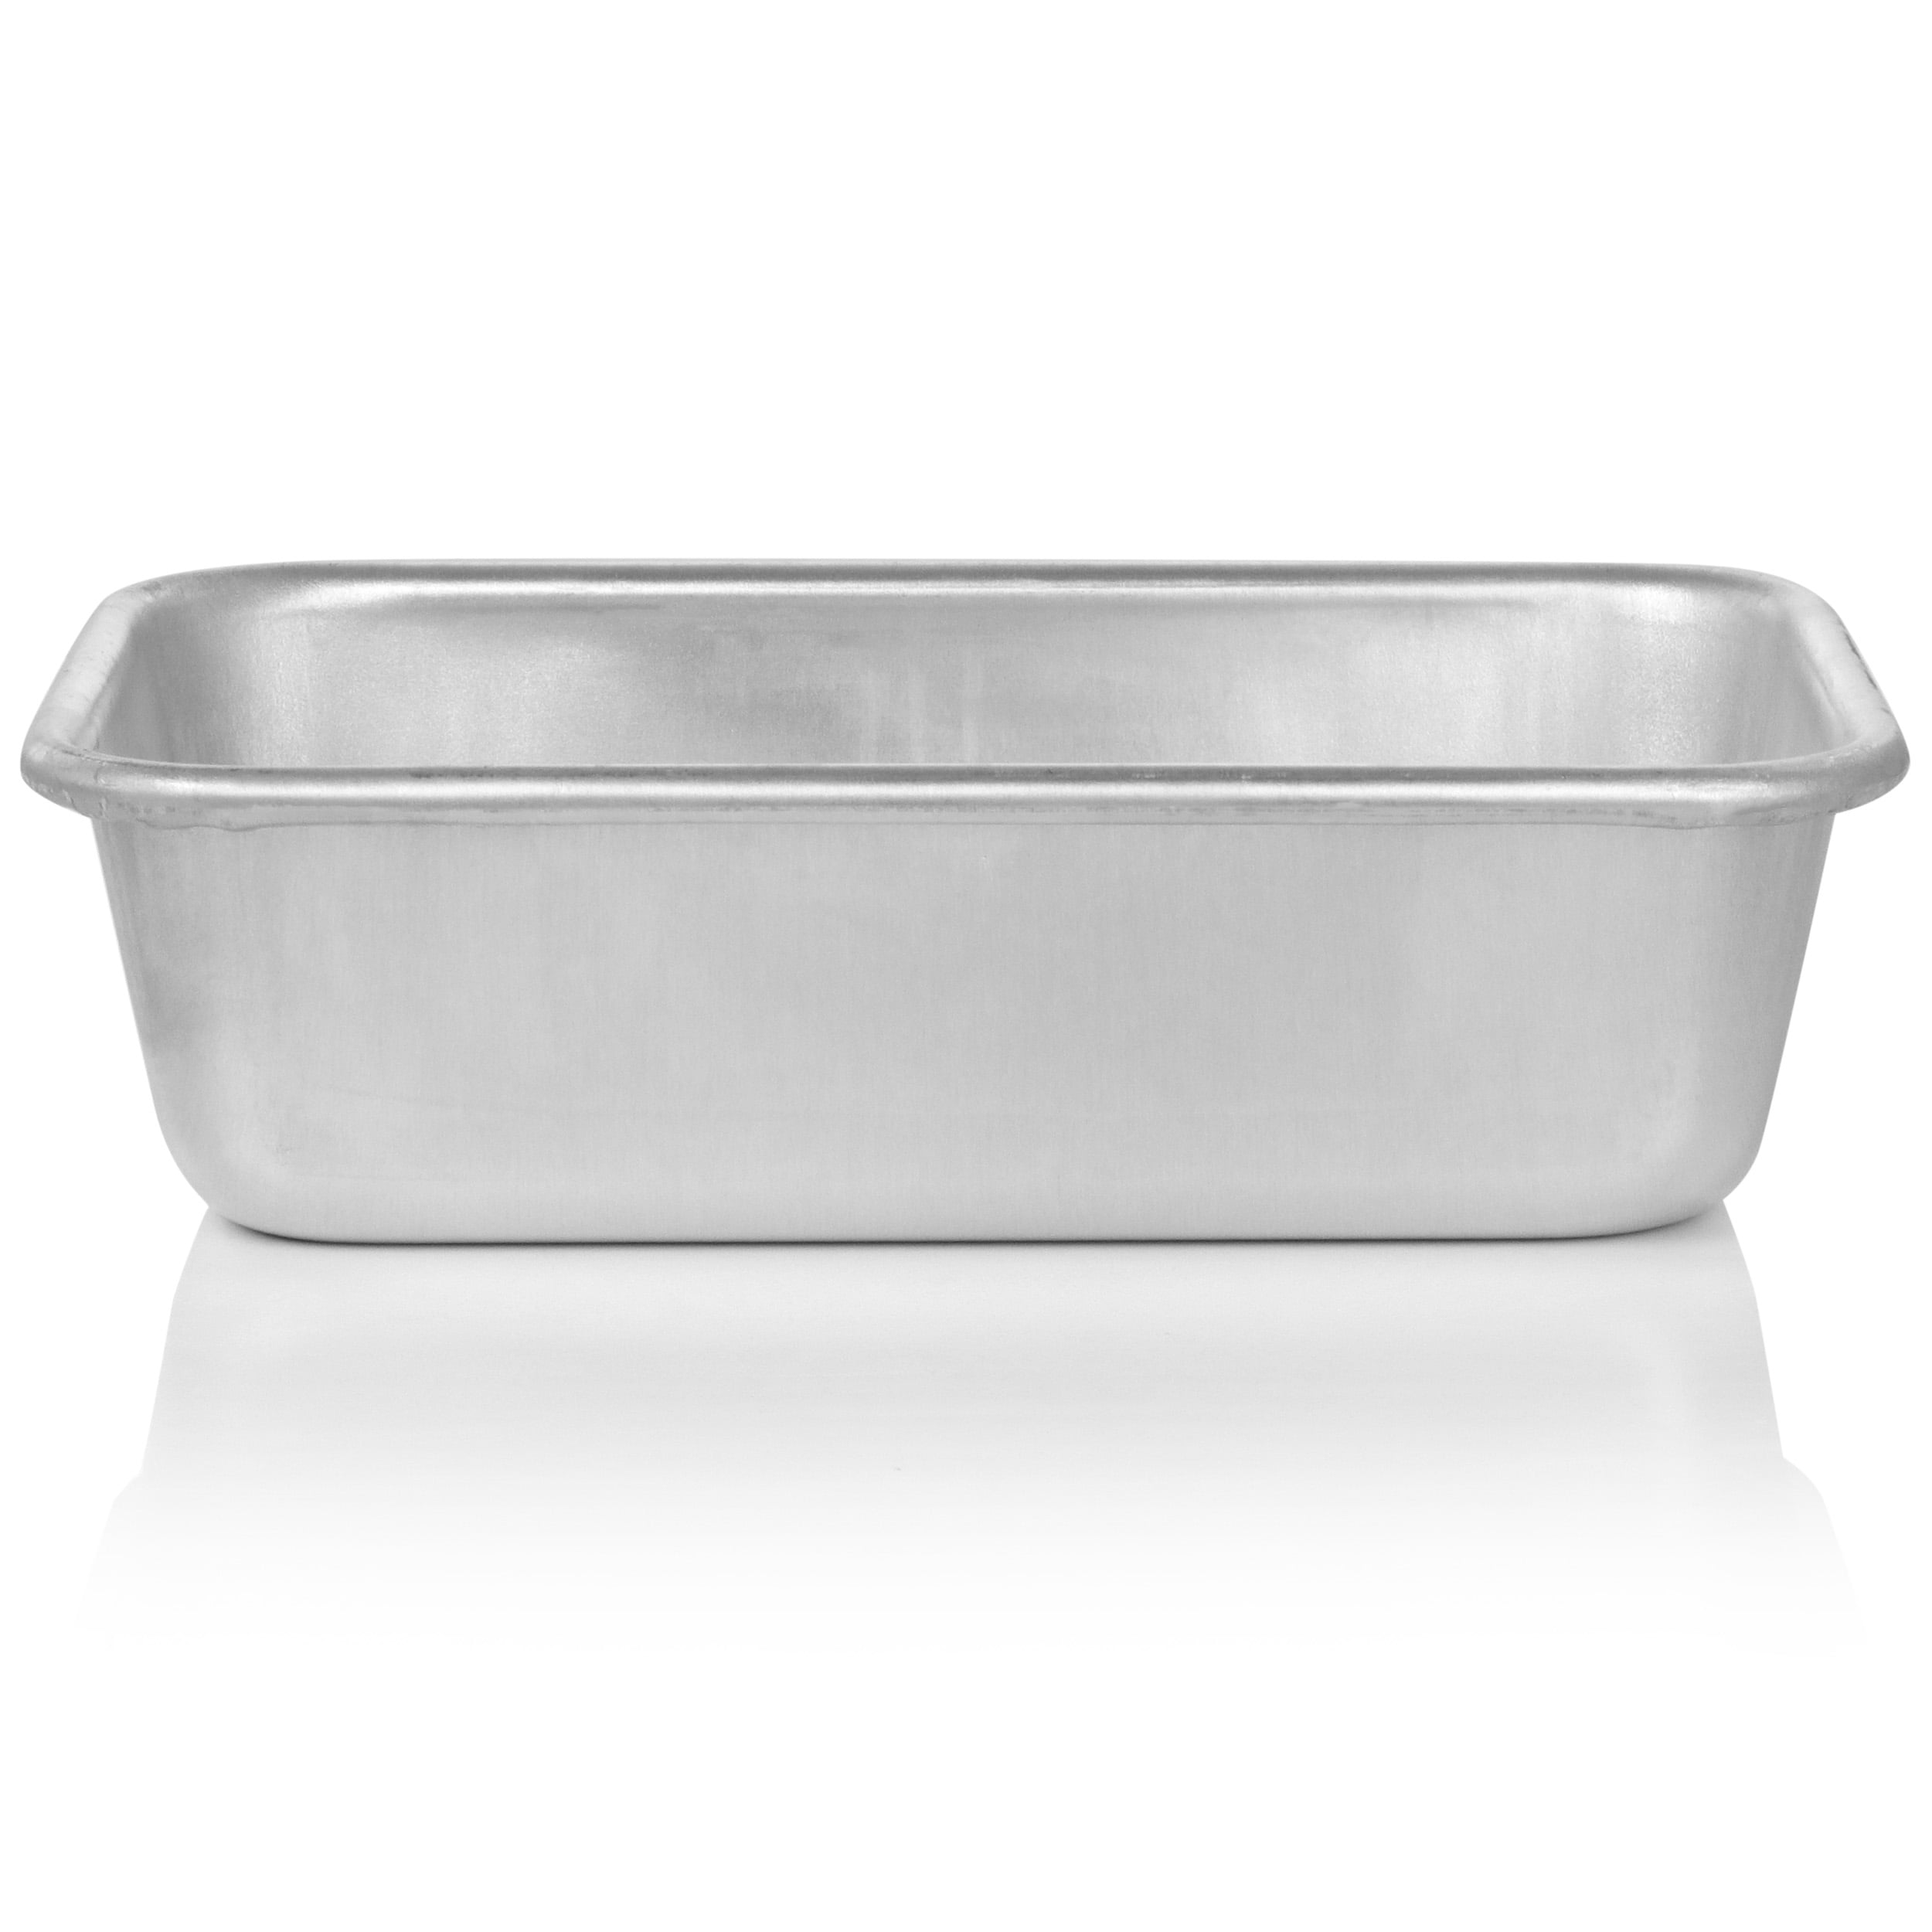 Durable Packaging 5000-30 1 Lb Loaf Bakery Aluminum Pan - 5 3/4L x 3 3/8W  x 2H